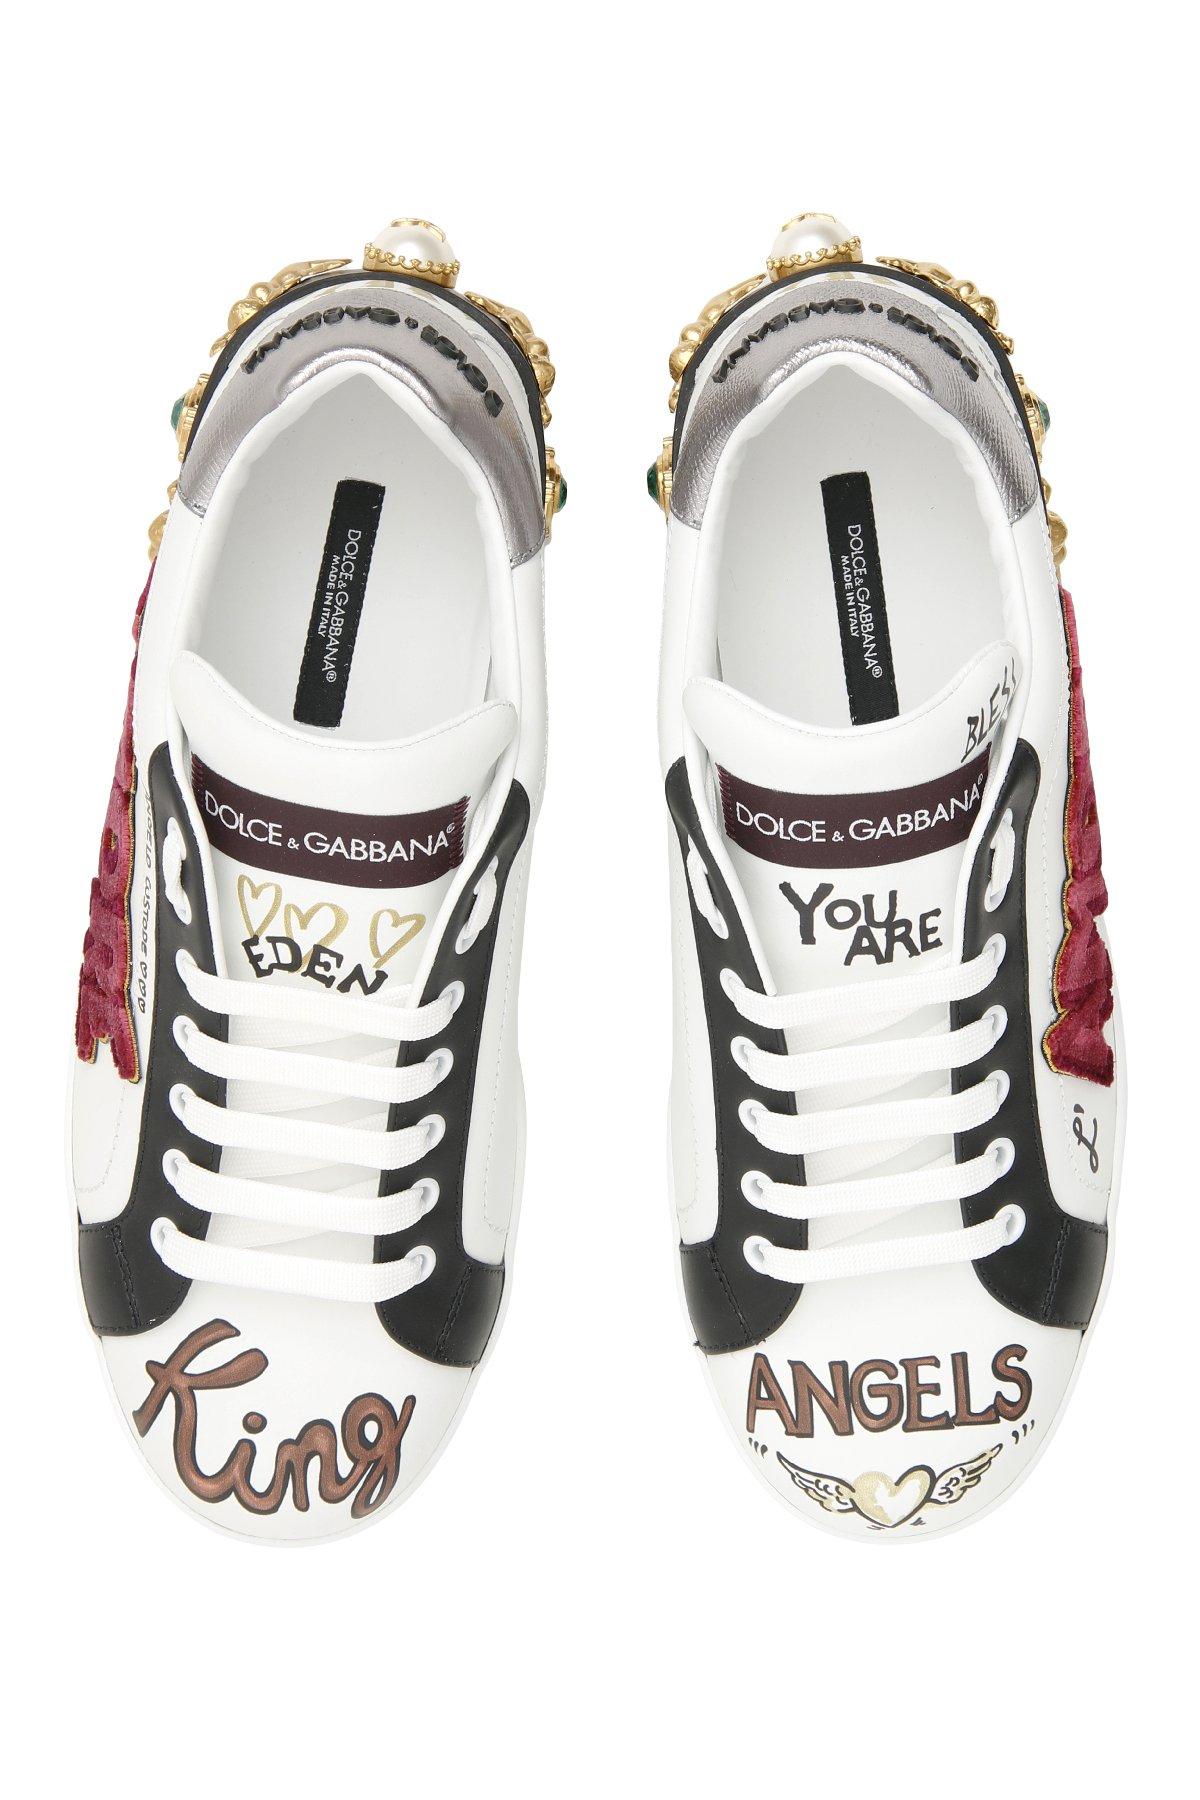 Dolce & Gabbana Amore Patch Sneakers for Men | Lyst